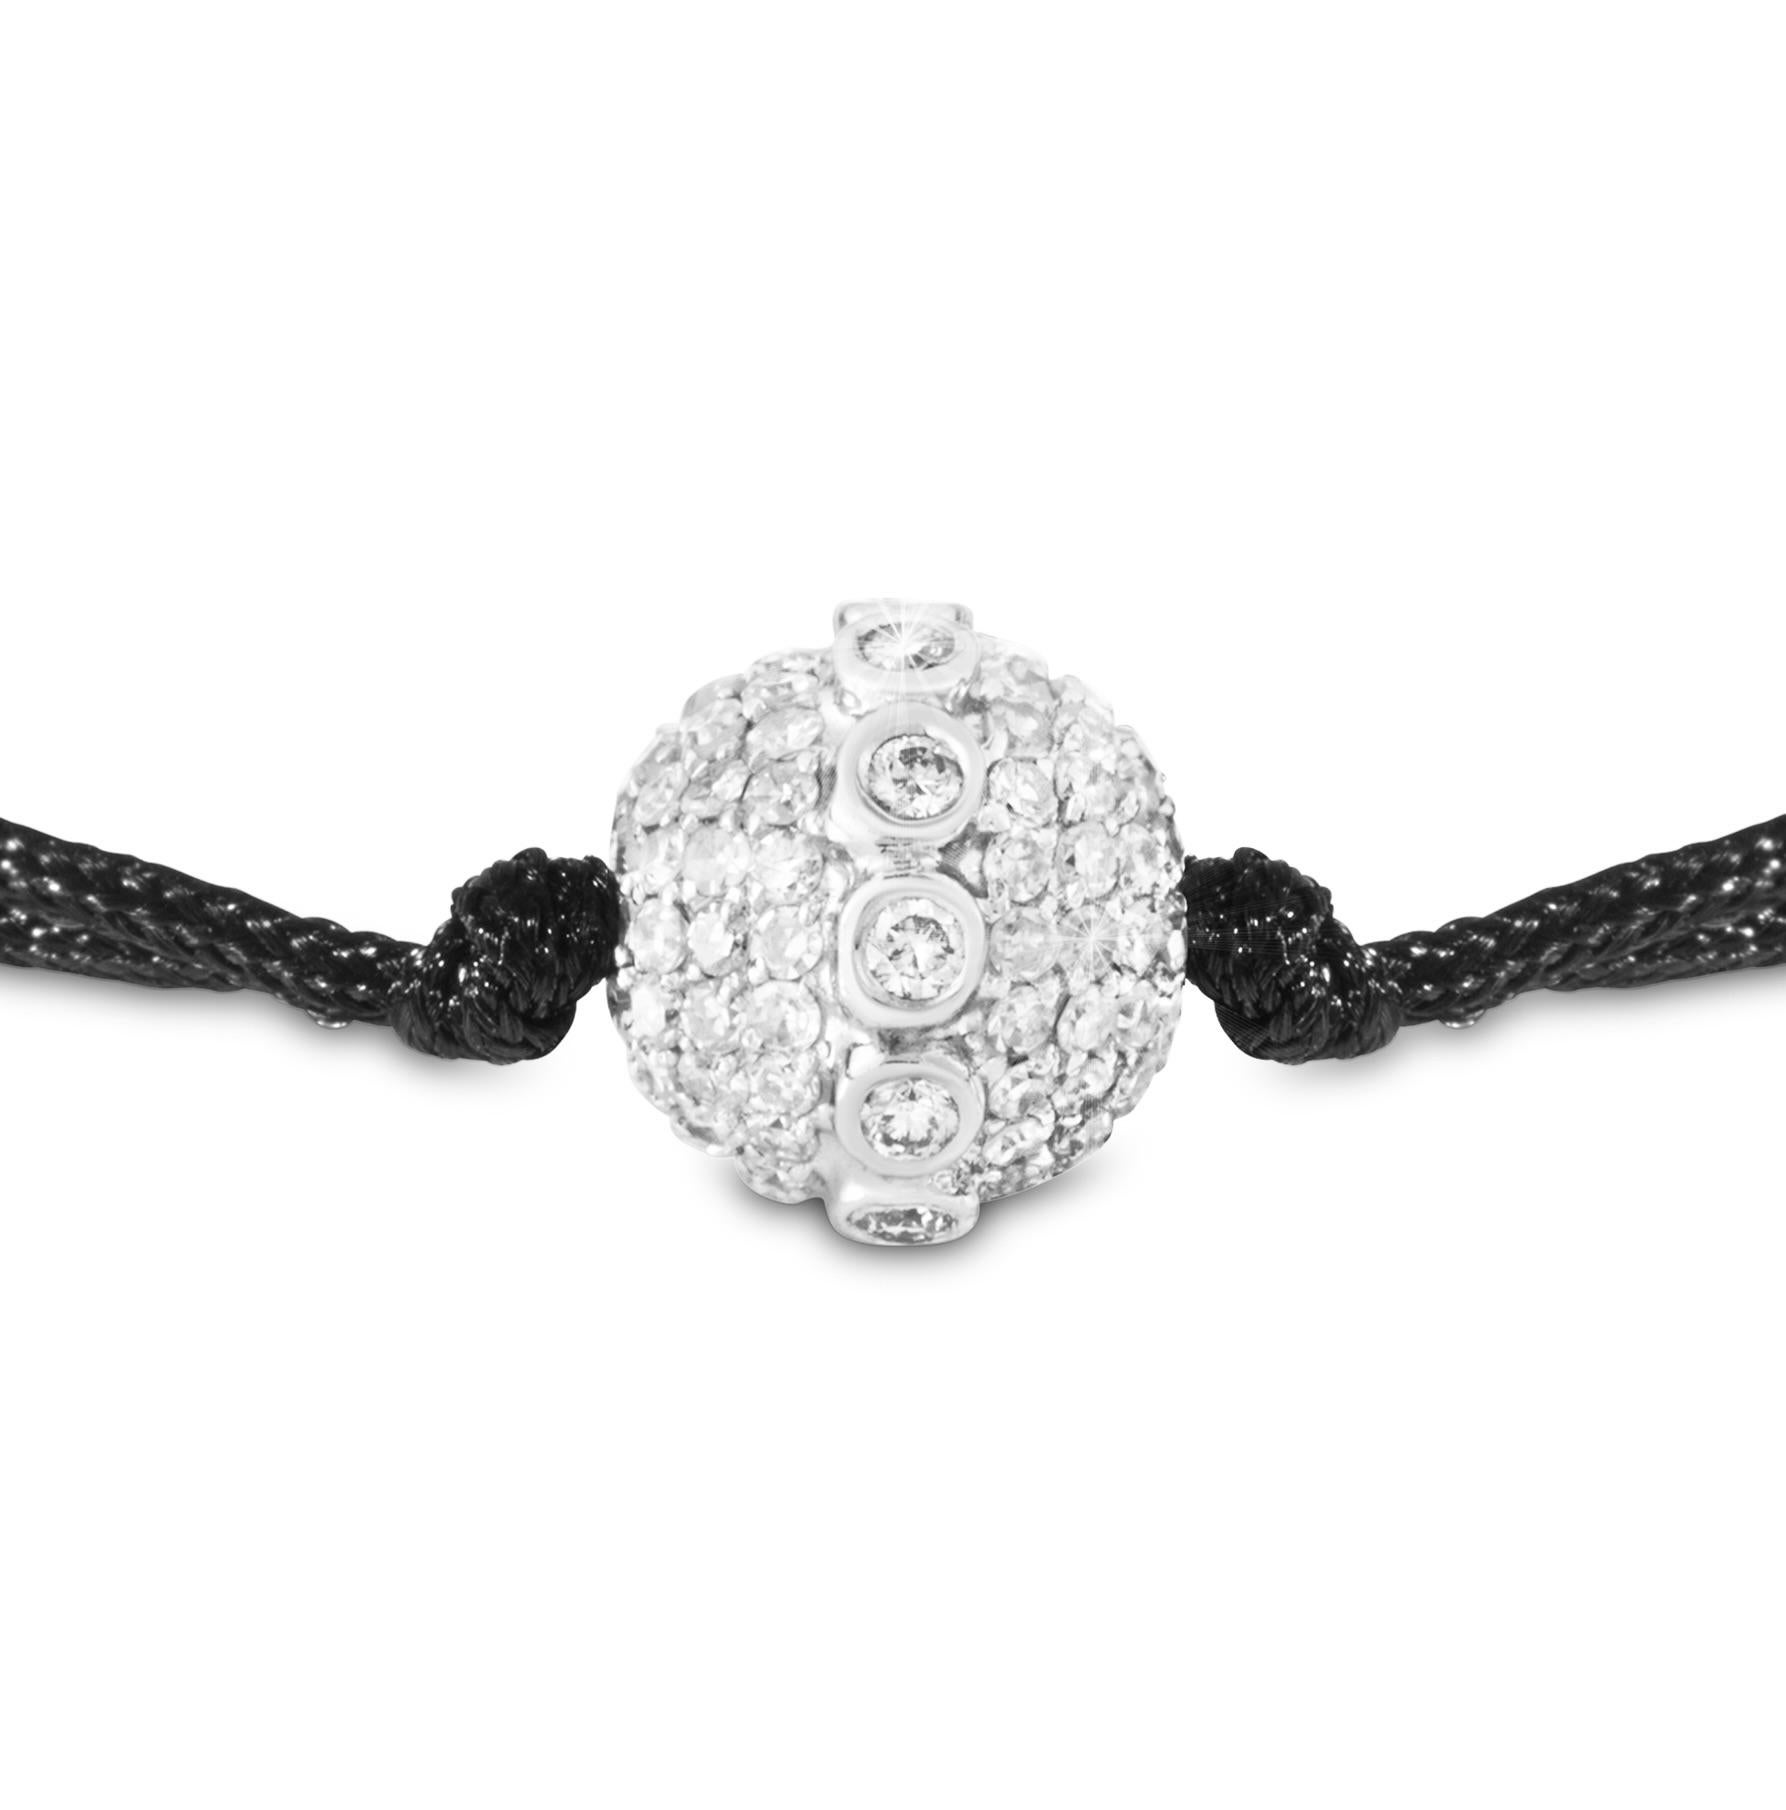 A new take on a classic one size bracelet by representing THEVAULT15's handmade free turning 18-karat white gold Signature Infinity Orb. A special Orb encrusted with sparkling diamonds and a centered diamond belt representing infinity. Each bead is